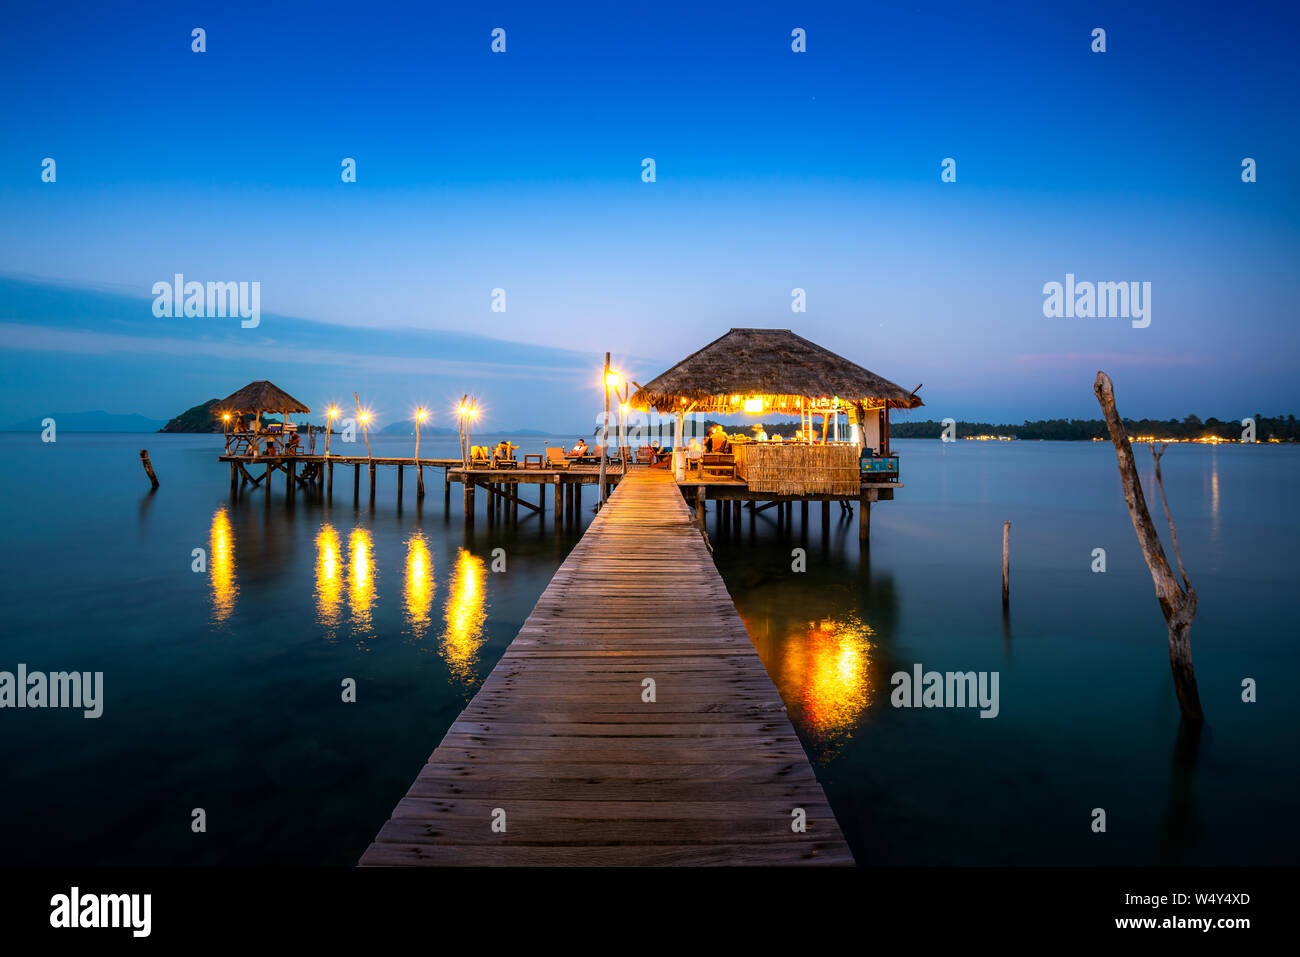 Wooden bar in sea and hut with night sky in Koh Mak at Trat, Thailand. Summer, Travel, Vacation and Holiday concept. Stock Photo